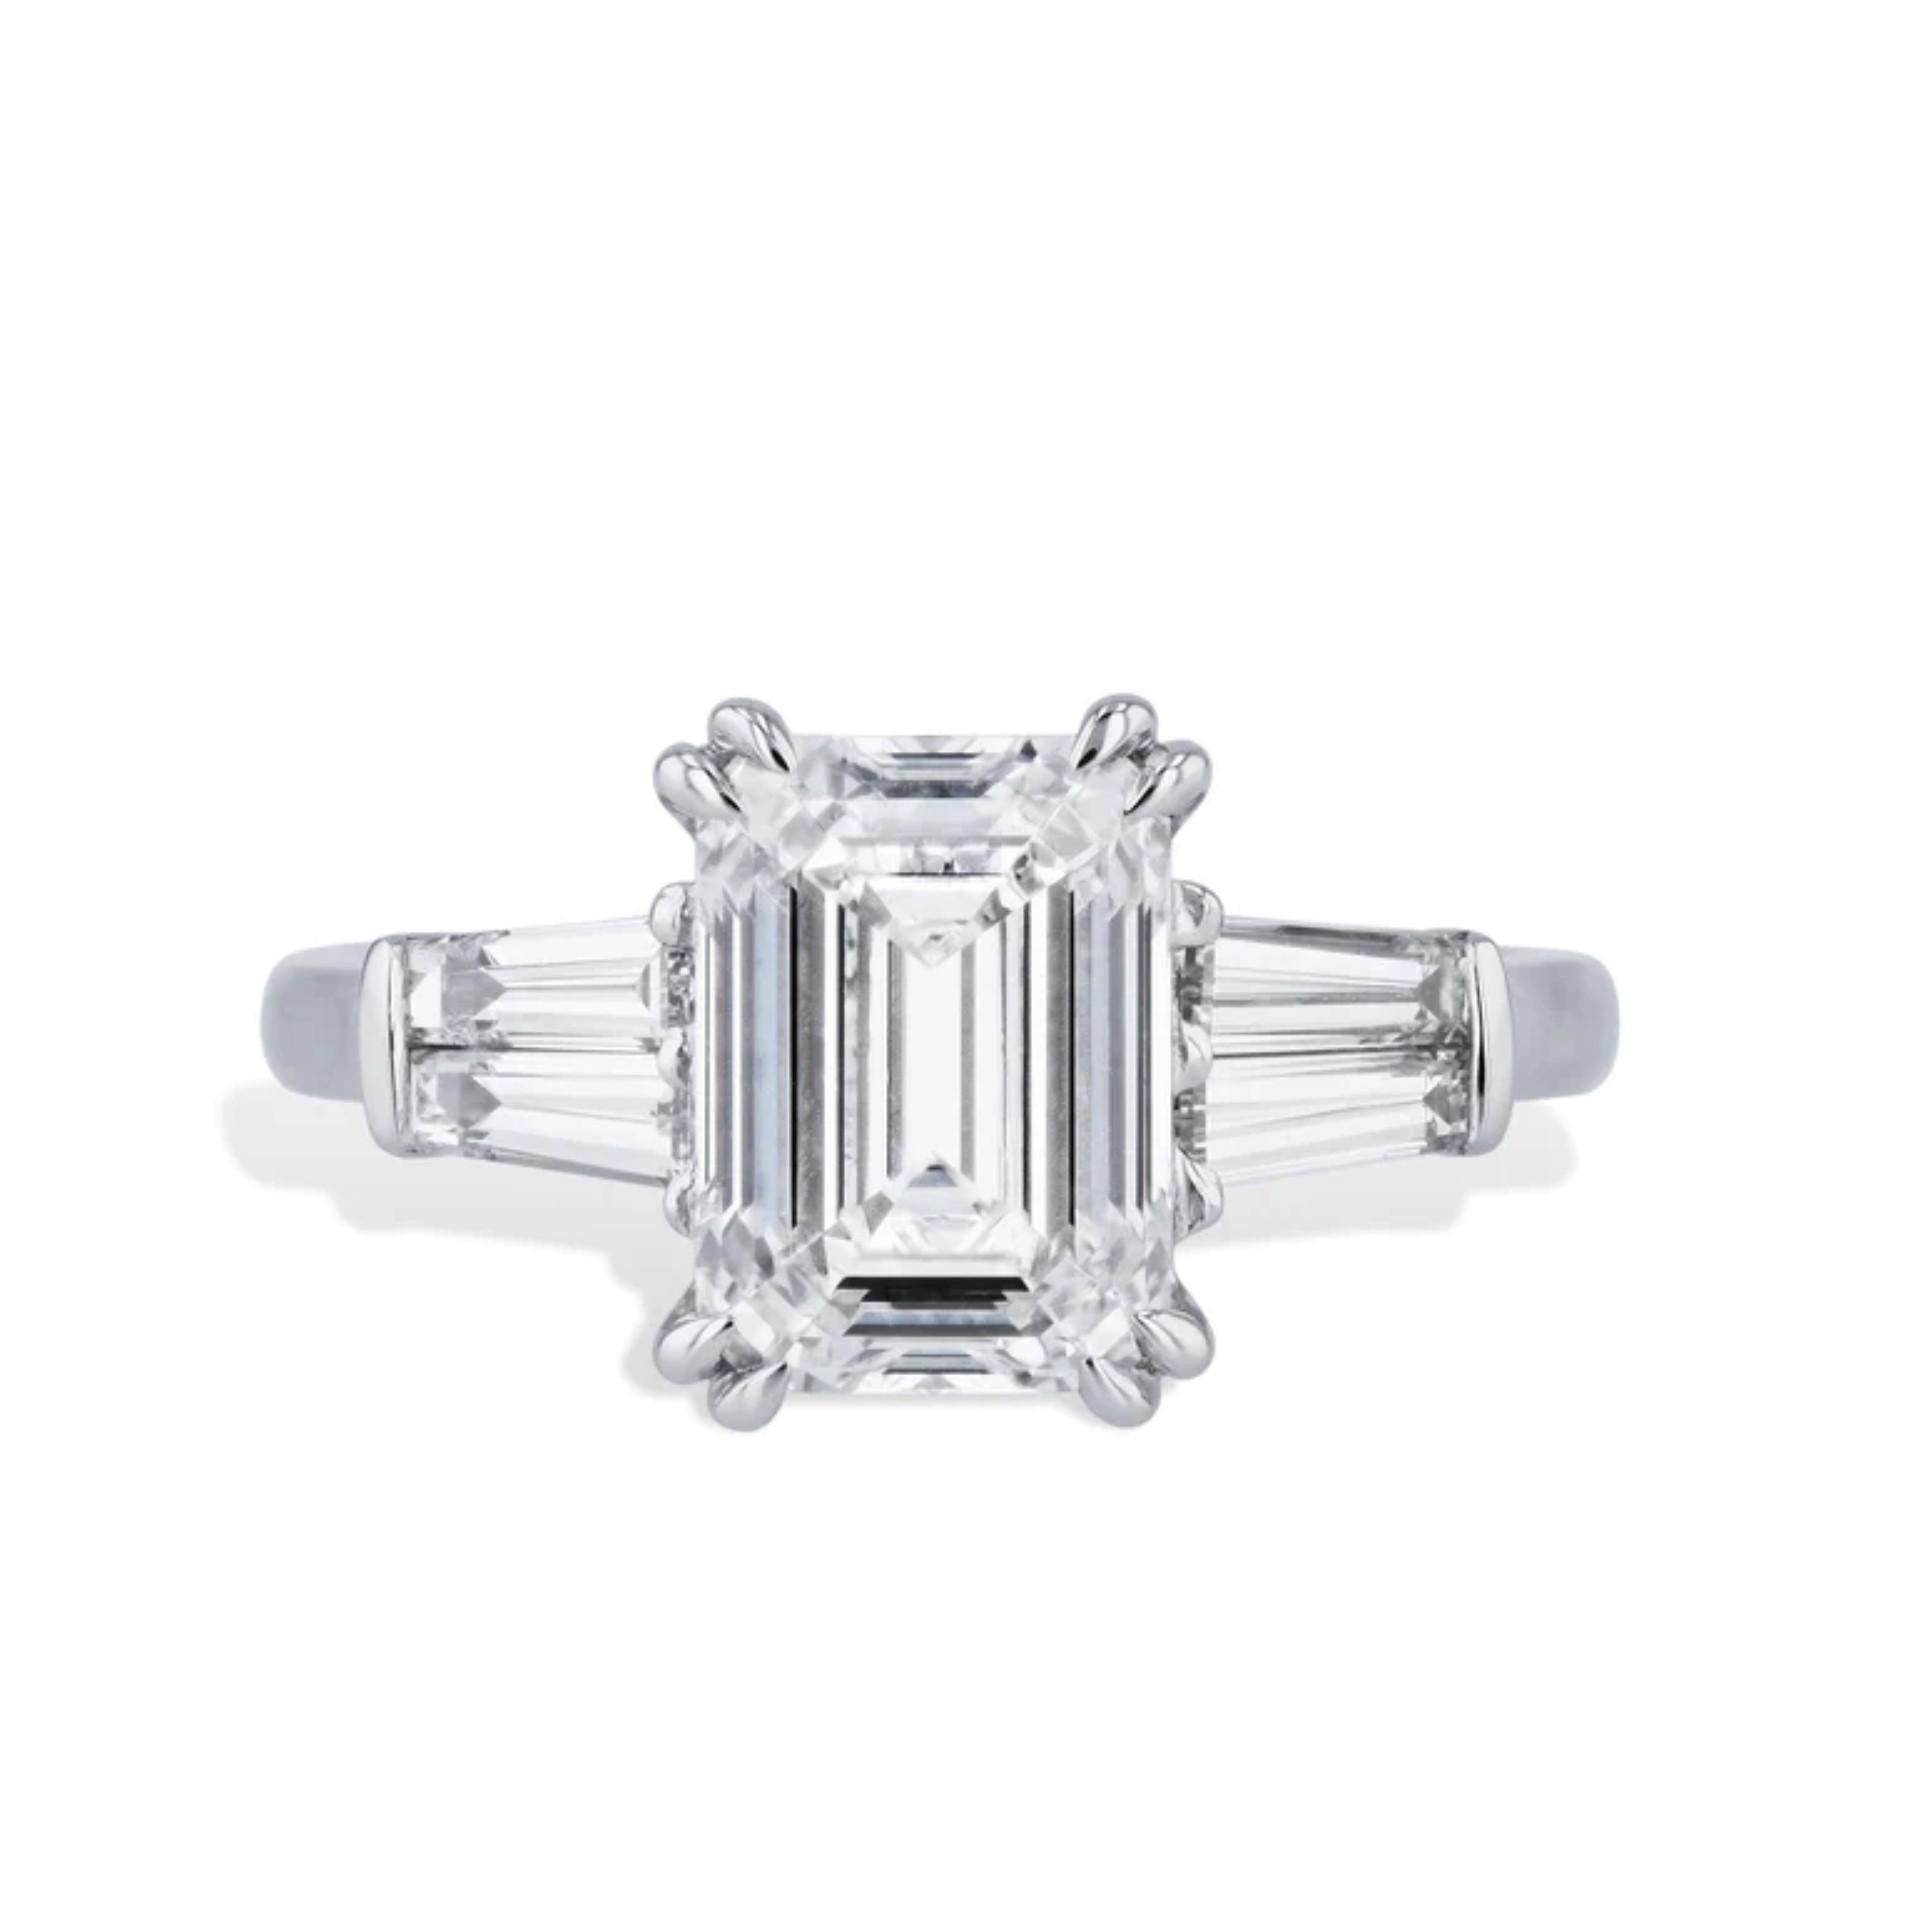 This classic emerald cut diamond estate ring boasts a stunning 3.25 carat center stone framed in glittering platinum. 
Four tapered baguettes add extra sparkle and ensure an unforgettable presence. 

The center stone is GIA certified and the number